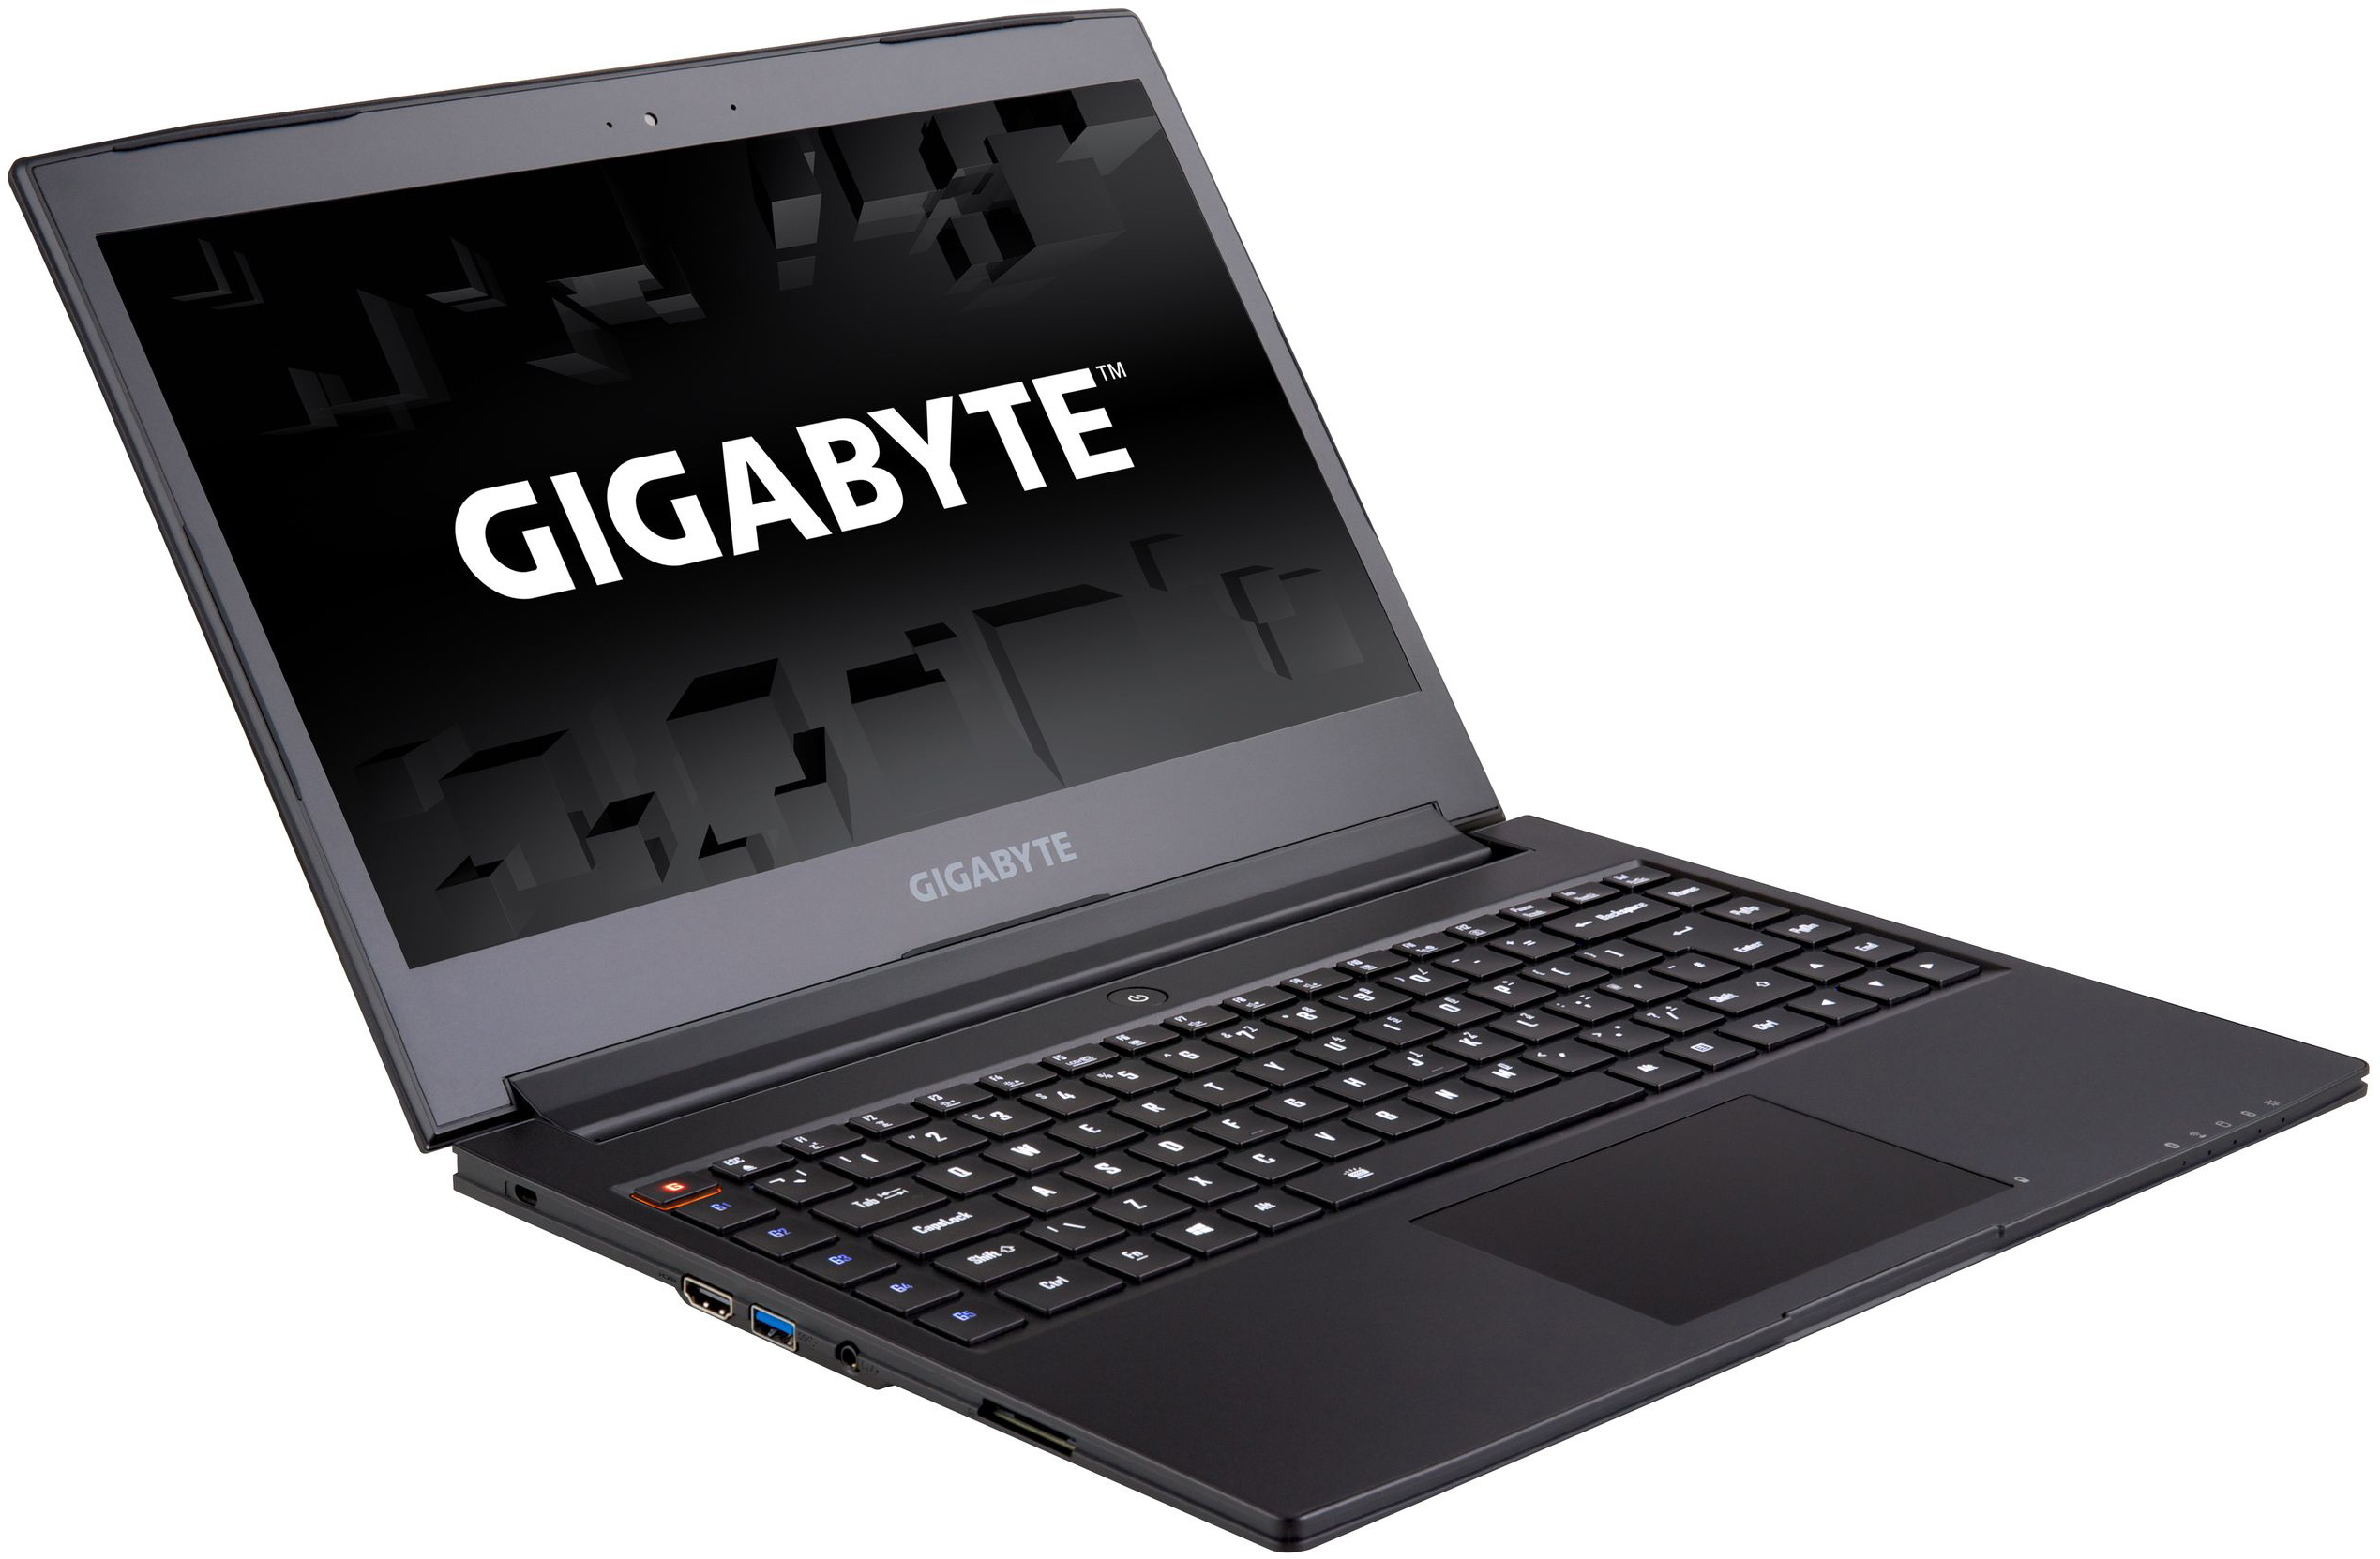 Gigabyte Aero 14 Thin Gaming Laptop With Nvidia Geforce Gtx 970m And 10 Hour Battery Life